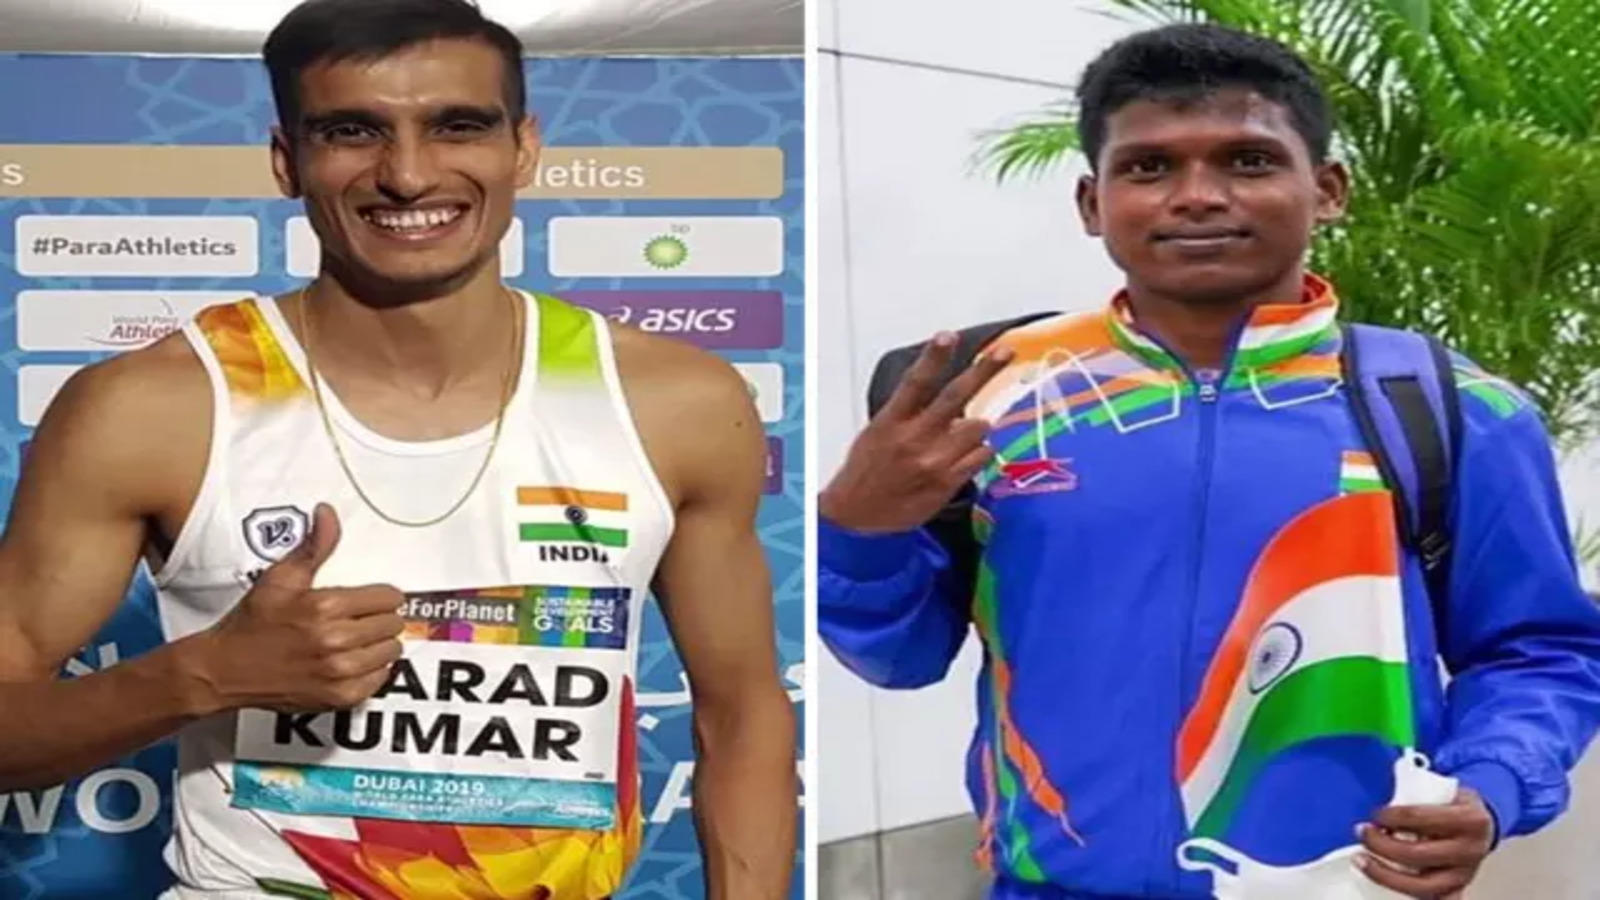 Tokyo Paralympics 2020: India wins 2 medals in high jump